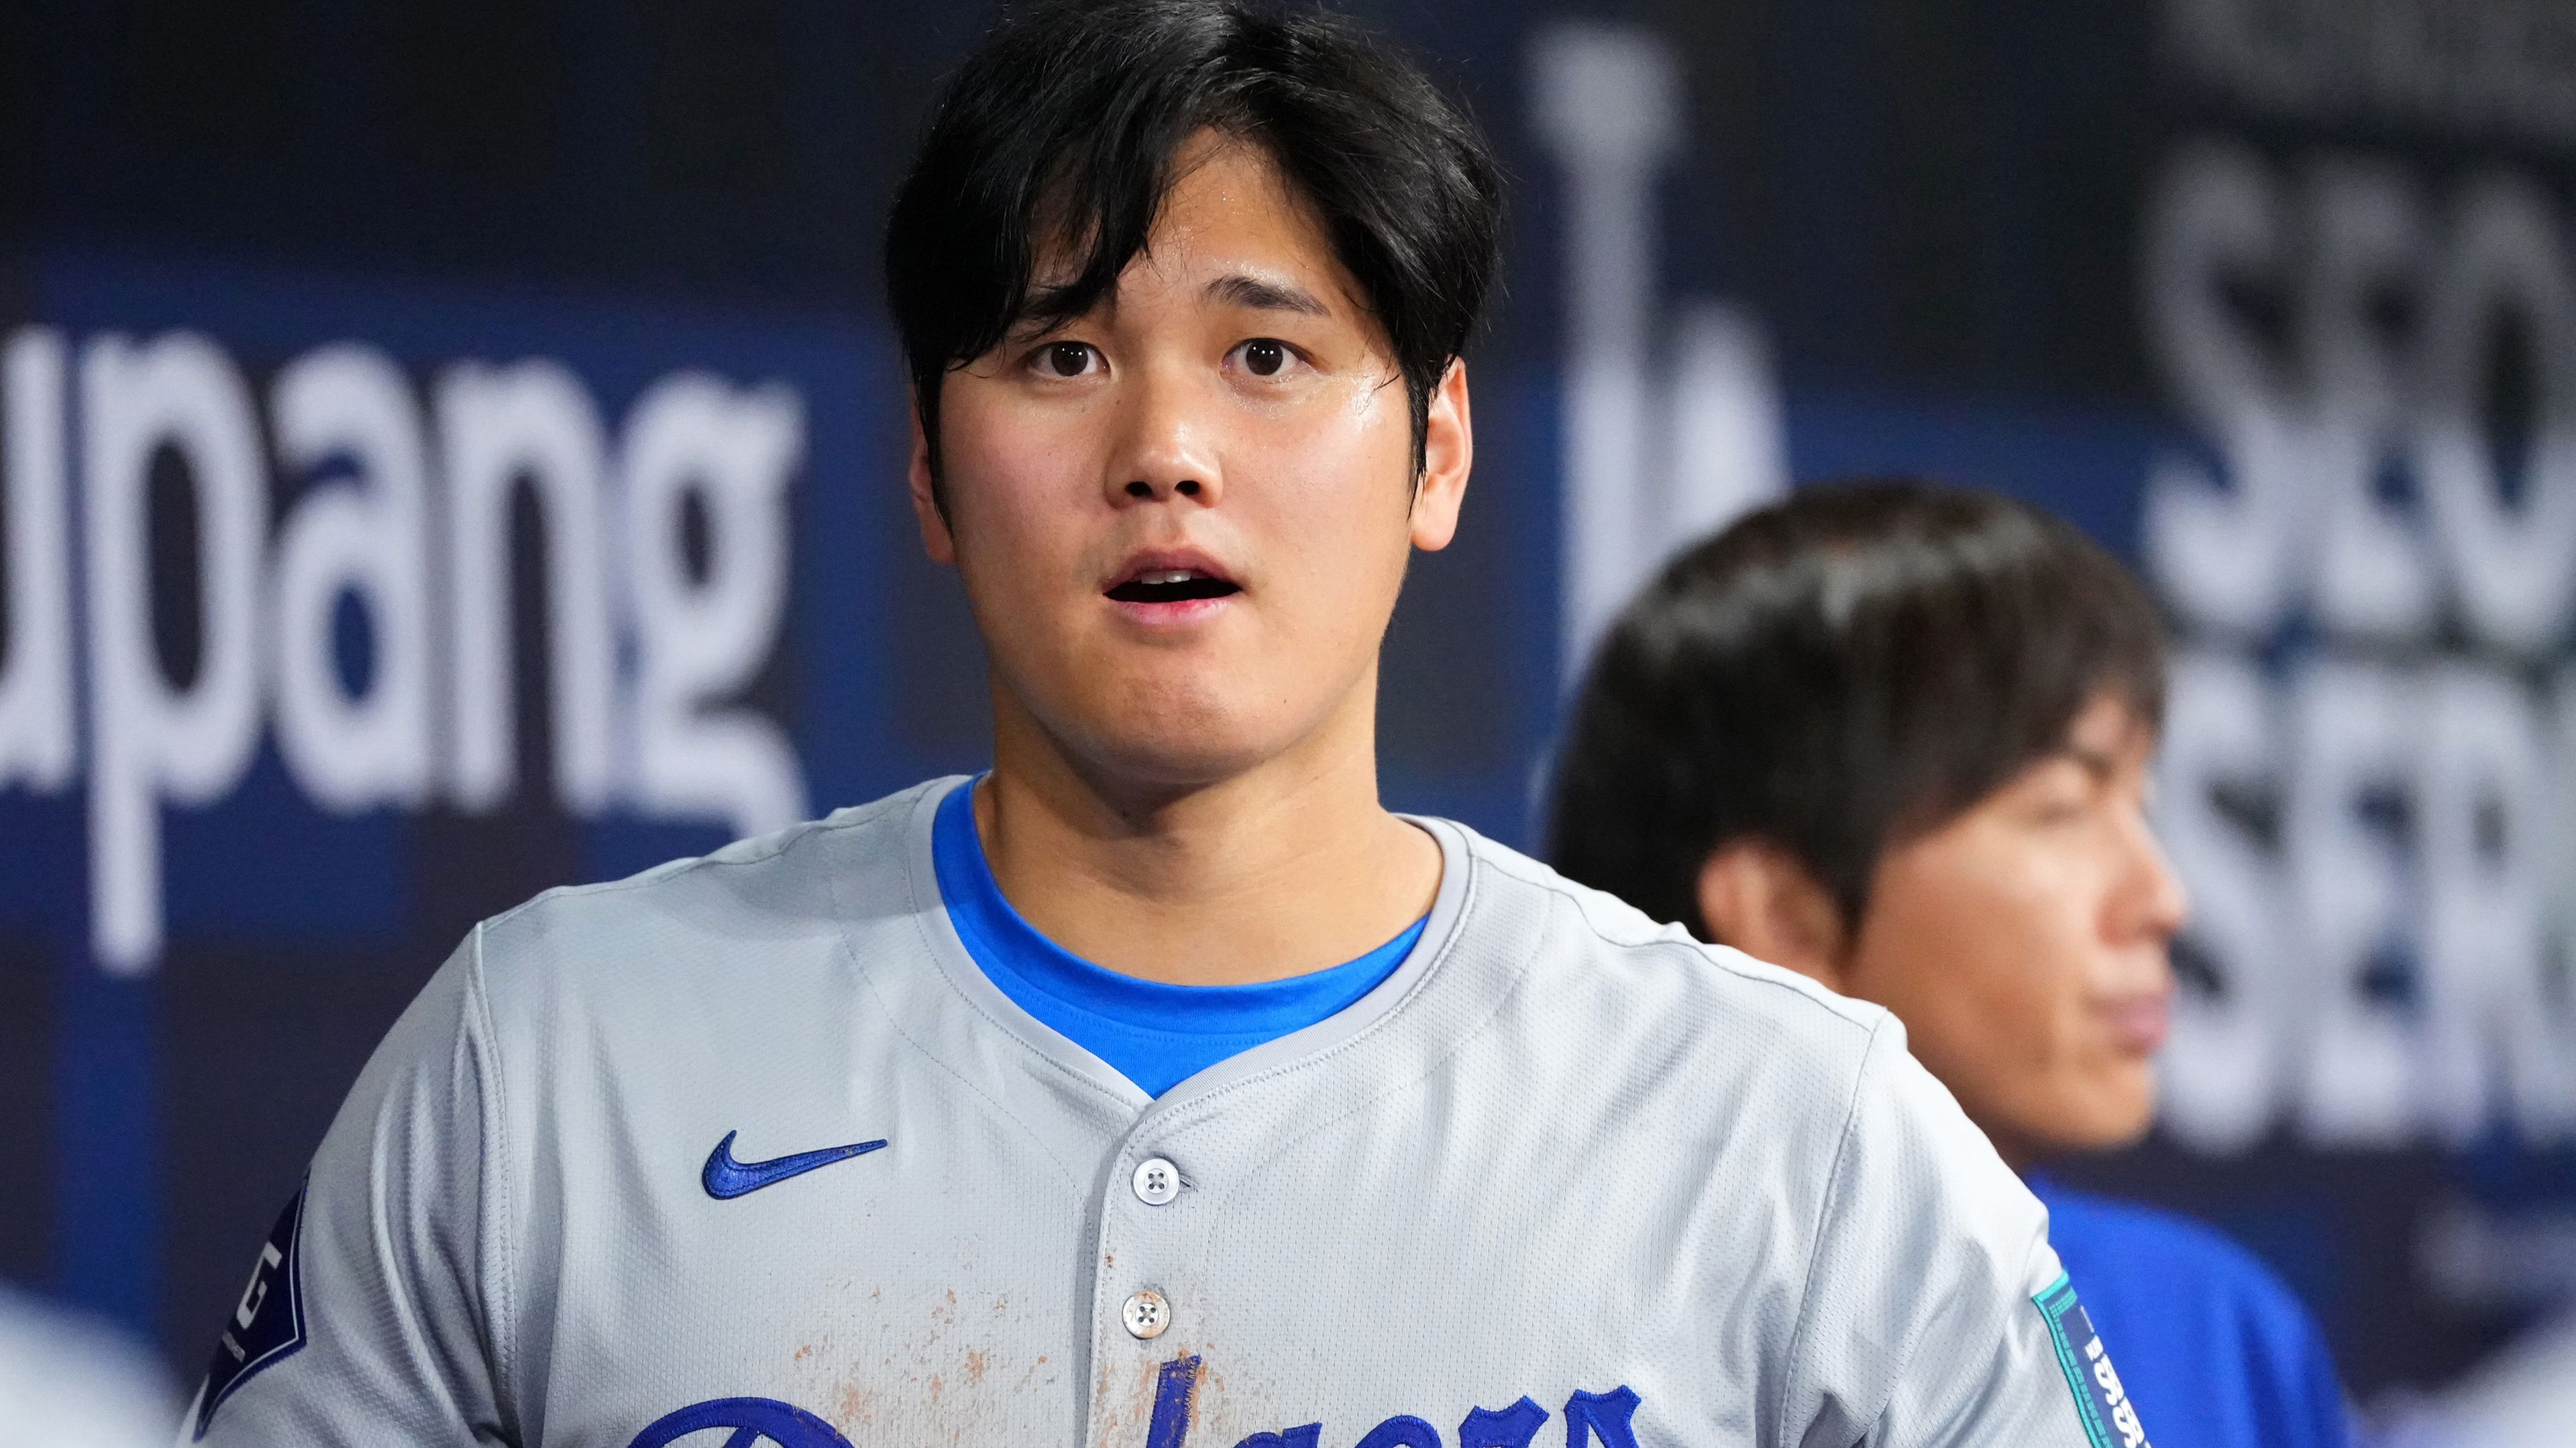 Shohei Ohtani #17 of the Los Angeles Dodgers is seen while his interpreter Ippei Mizuhara is seen in the dugout during the 2024 Seoul Series game between Los Angeles Dodgers and San Diego Padres at Gocheok Sky Dome on March 20, 2024 in Seoul, South Korea. (Photo by Masterpress/Getty Images)